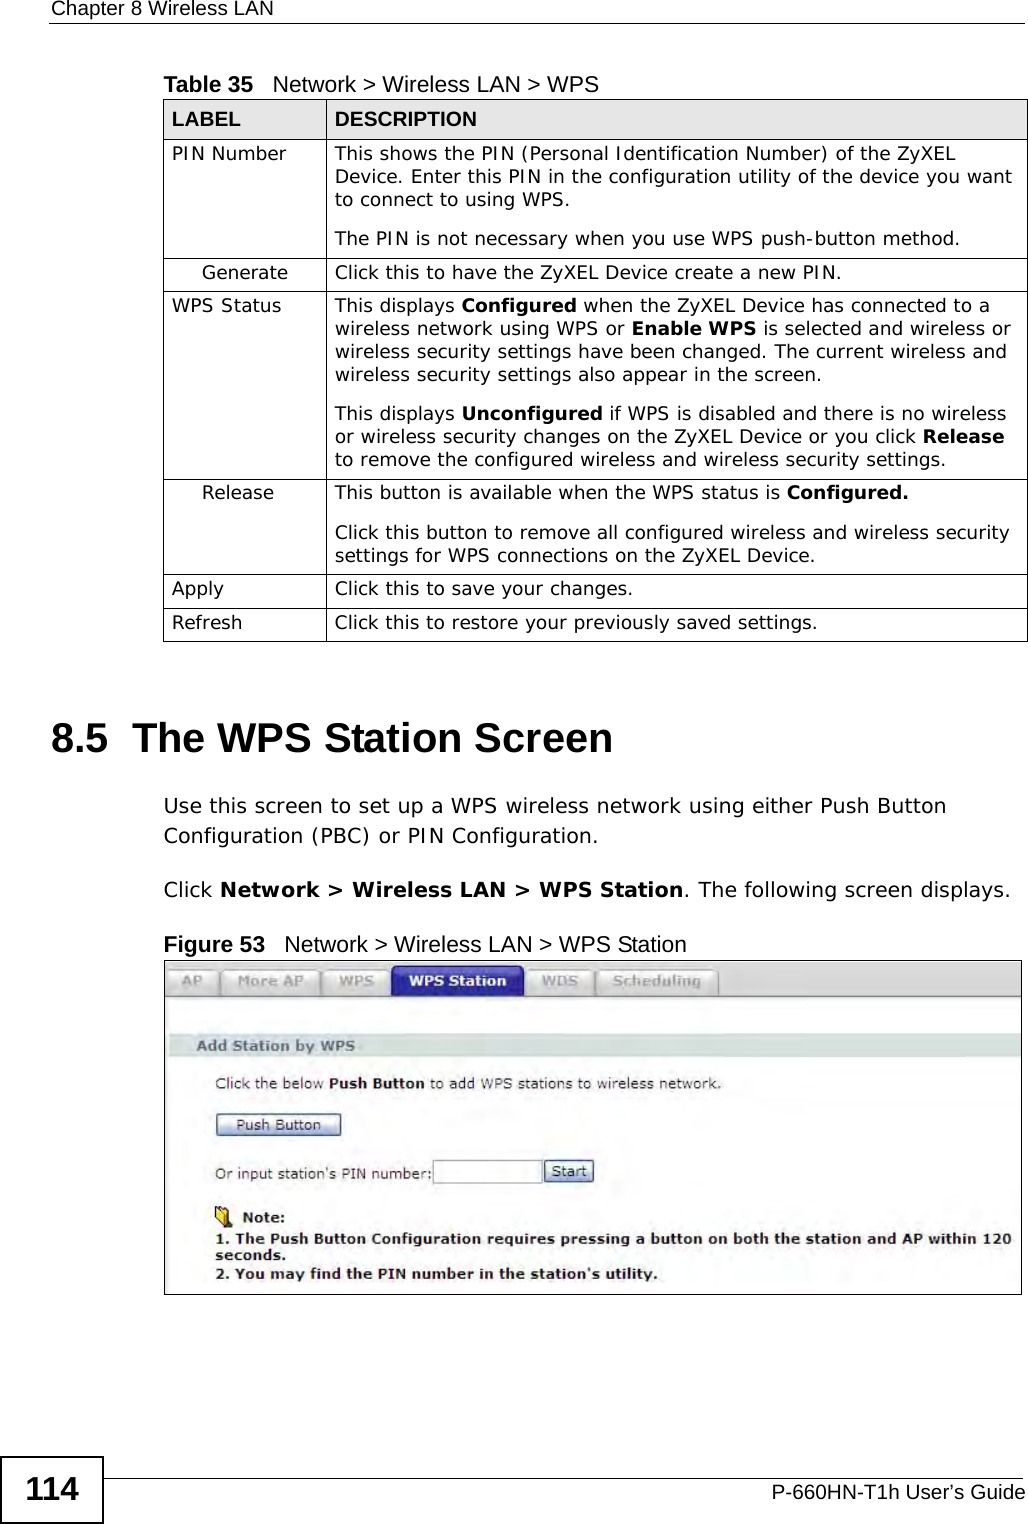 Chapter 8 Wireless LANP-660HN-T1h User’s Guide1148.5  The WPS Station ScreenUse this screen to set up a WPS wireless network using either Push Button Configuration (PBC) or PIN Configuration.Click Network &gt; Wireless LAN &gt; WPS Station. The following screen displays.Figure 53   Network &gt; Wireless LAN &gt; WPS StationPIN Number This shows the PIN (Personal Identification Number) of the ZyXEL Device. Enter this PIN in the configuration utility of the device you want to connect to using WPS.The PIN is not necessary when you use WPS push-button method.Generate Click this to have the ZyXEL Device create a new PIN. WPS Status This displays Configured when the ZyXEL Device has connected to a wireless network using WPS or Enable WPS is selected and wireless or wireless security settings have been changed. The current wireless and wireless security settings also appear in the screen.This displays Unconfigured if WPS is disabled and there is no wireless or wireless security changes on the ZyXEL Device or you click Release to remove the configured wireless and wireless security settings.Release This button is available when the WPS status is Configured.Click this button to remove all configured wireless and wireless security settings for WPS connections on the ZyXEL Device.Apply Click this to save your changes.Refresh Click this to restore your previously saved settings.Table 35   Network &gt; Wireless LAN &gt; WPSLABEL DESCRIPTION